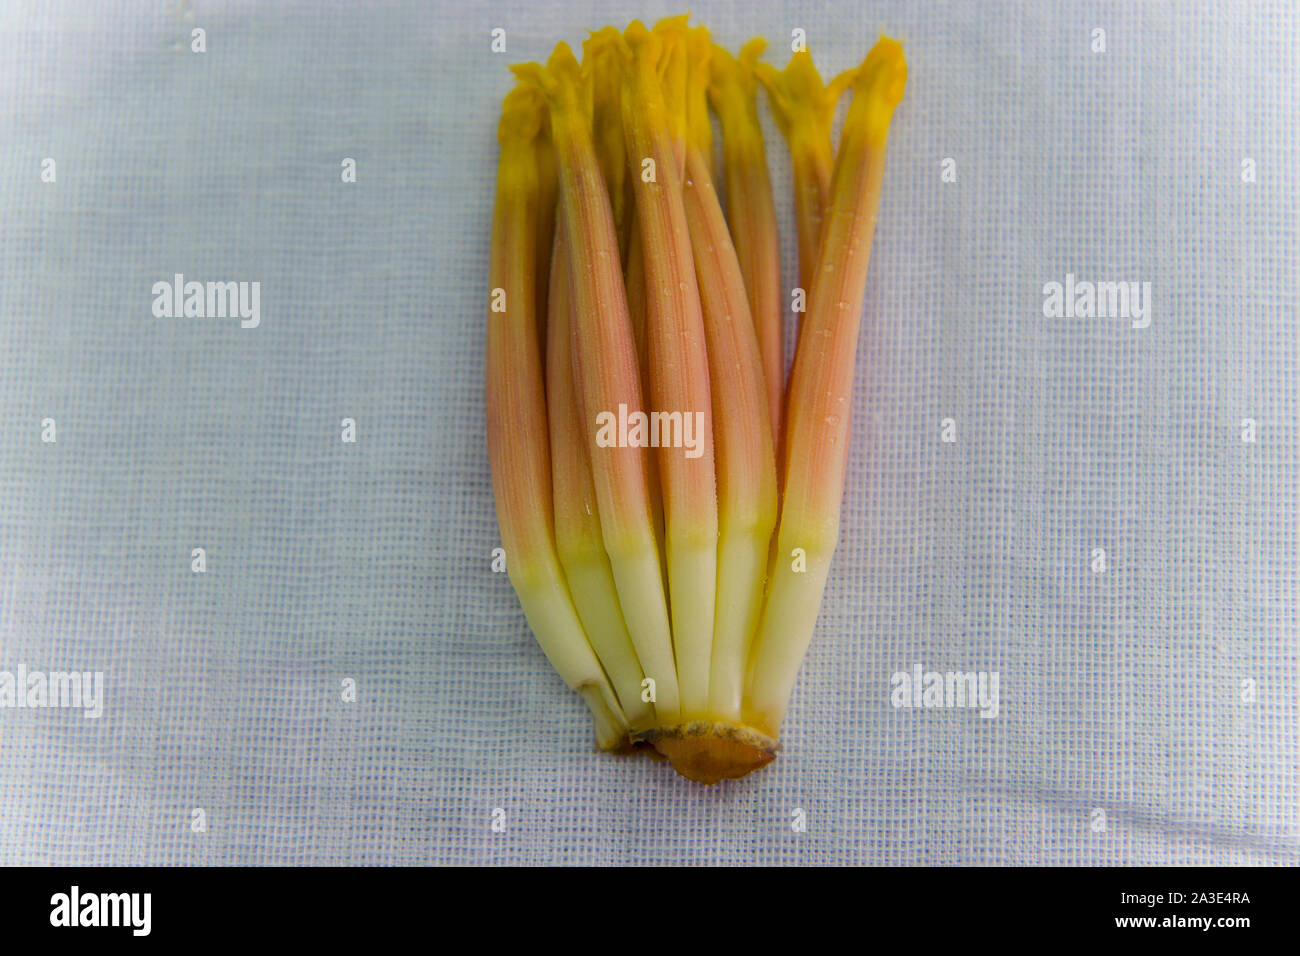 pilled bract of banana blossom, prepare bananas bud for cook or salad. High resolution image gallery. Stock Photo